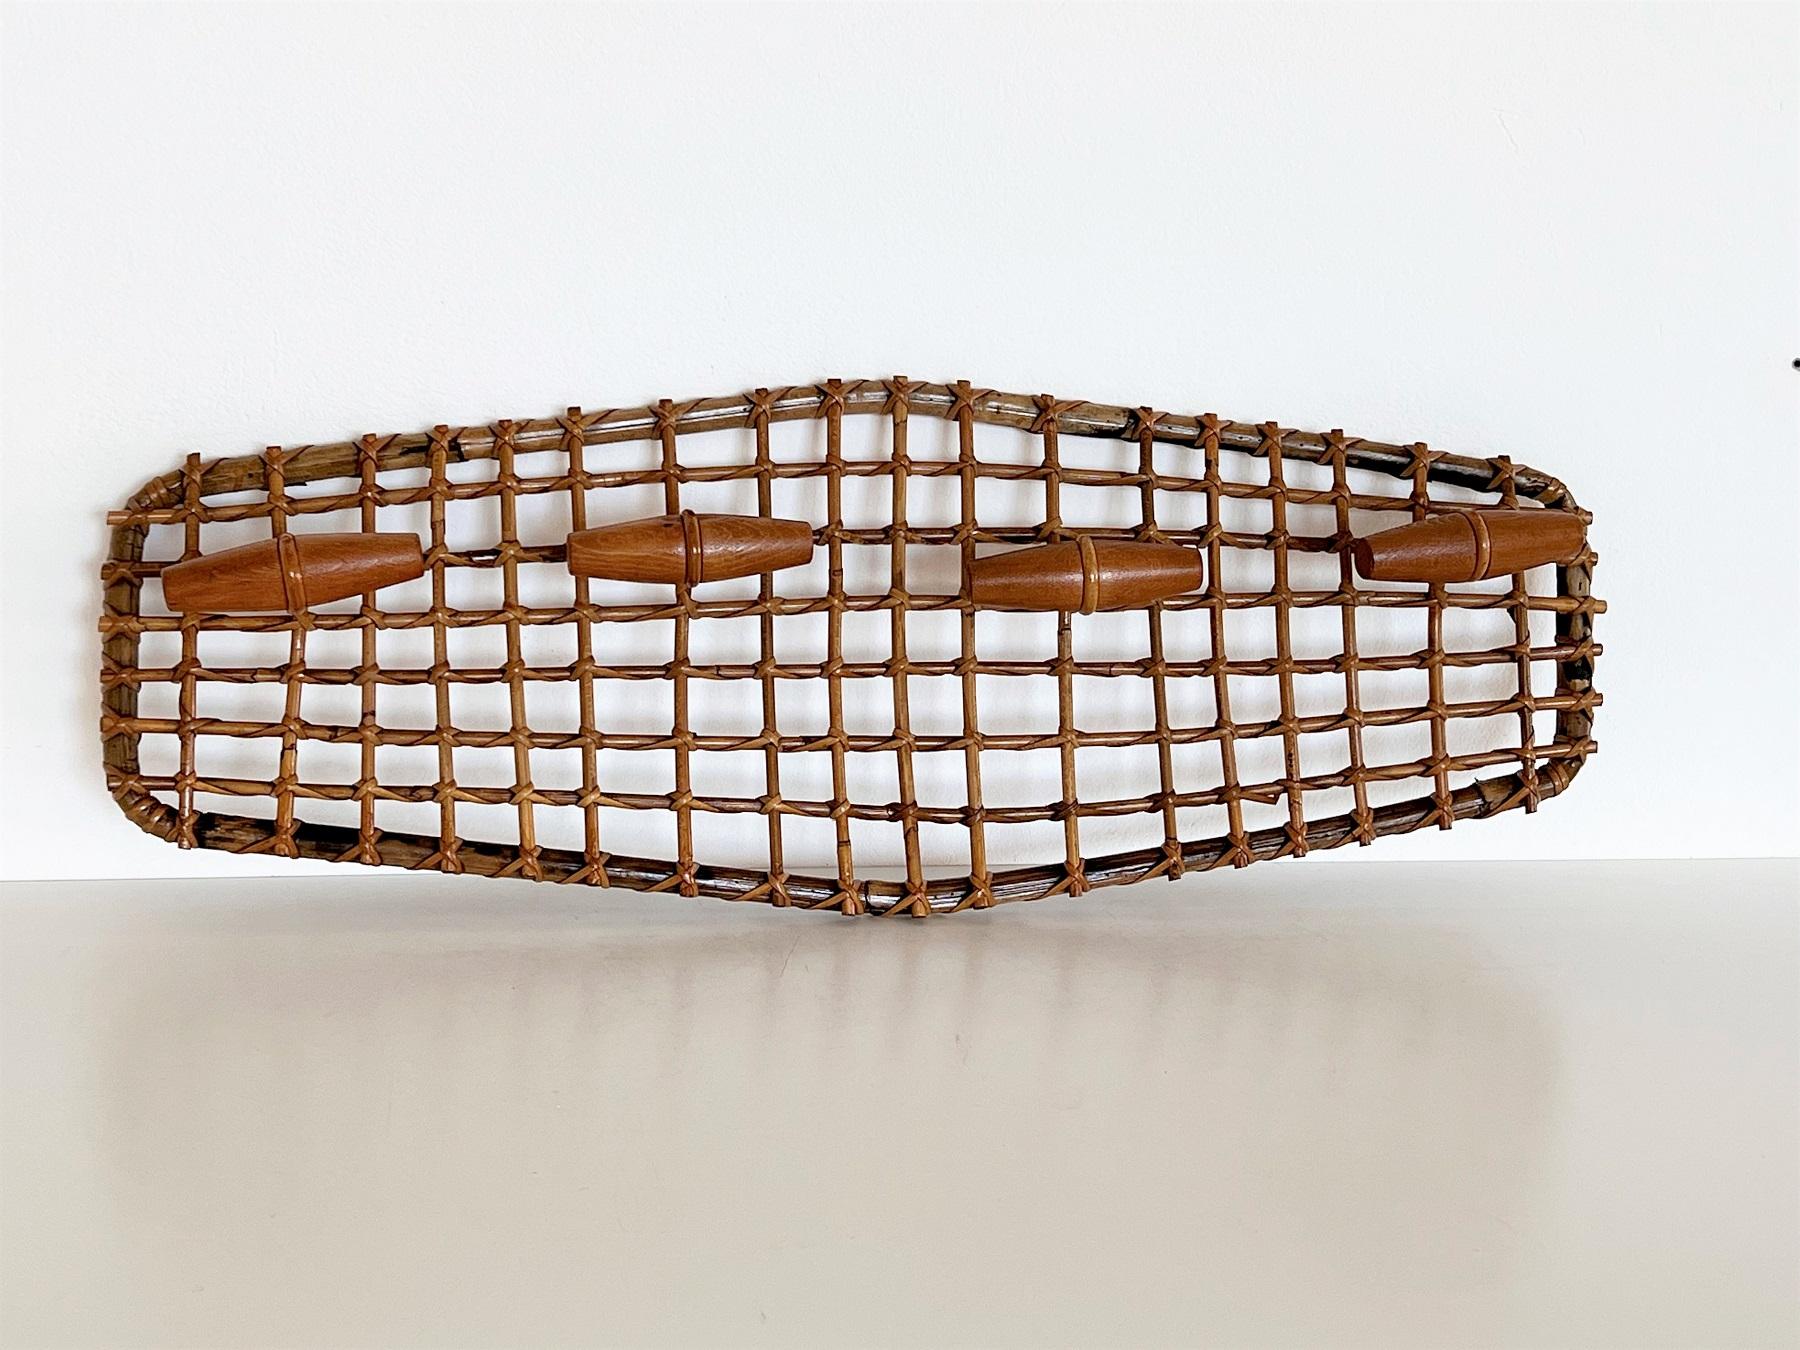 Olaf von Bohr designed for Bonacina bamboo and rattan coat rack
Manufactured in Italy, circa 1970's
Fine manufacturing with handwoven stitching detail
Four wood coat hangers
Interwoven grid pattern, clean linear design
Italian mid-century
The item